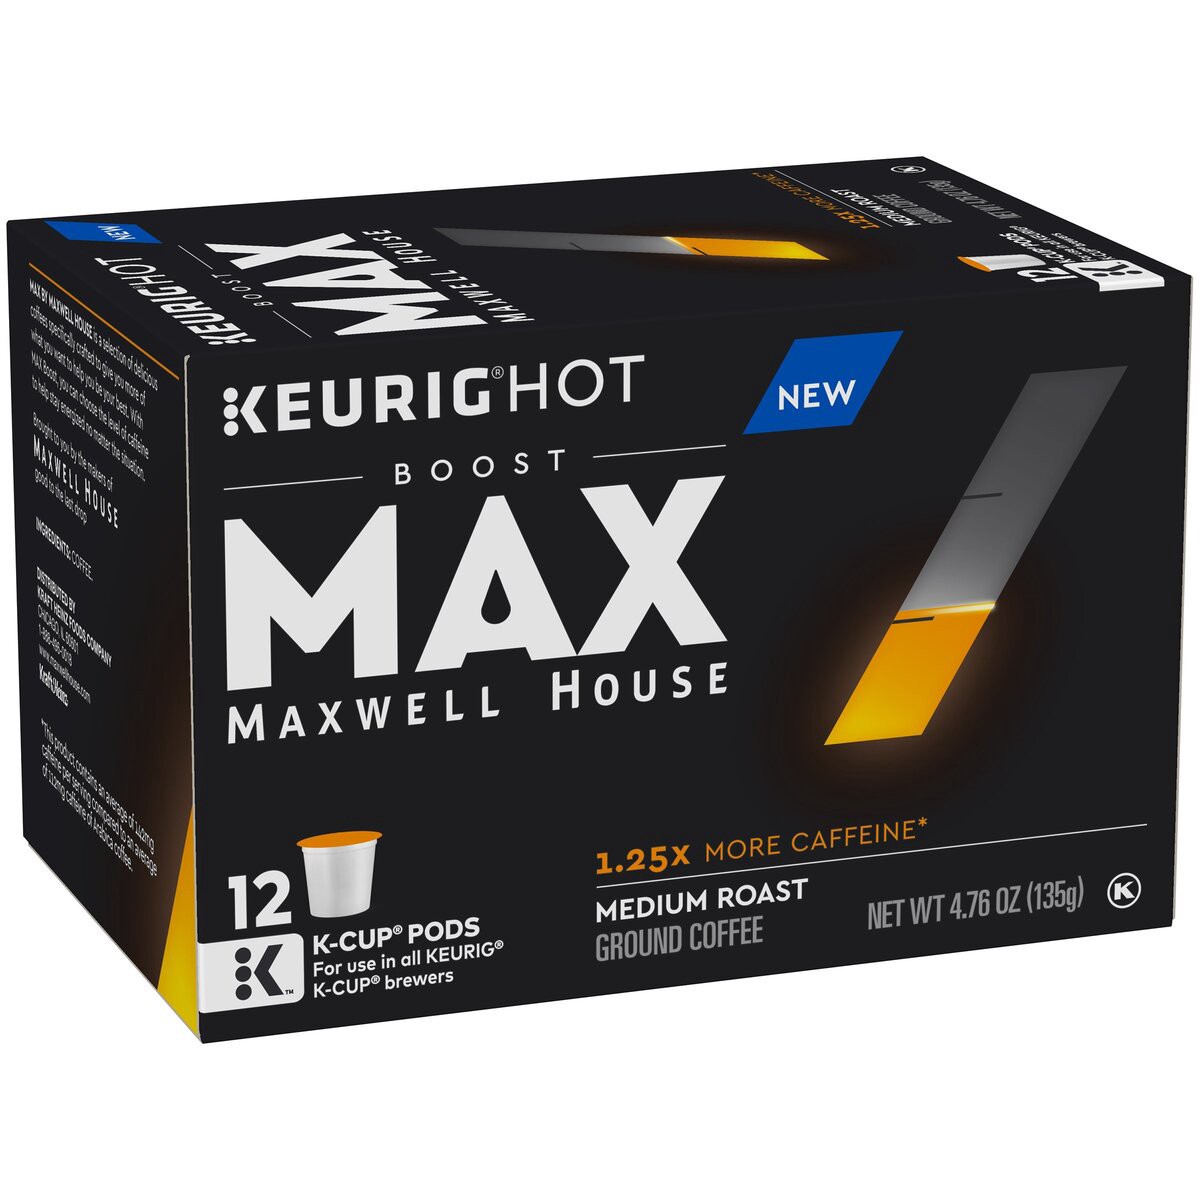 slide 8 of 8, Maxwell House Max Boost Medium Roast K-Cup Coffee Pods with 1.25X More Caffeine, 12 ct Box, 12 ct